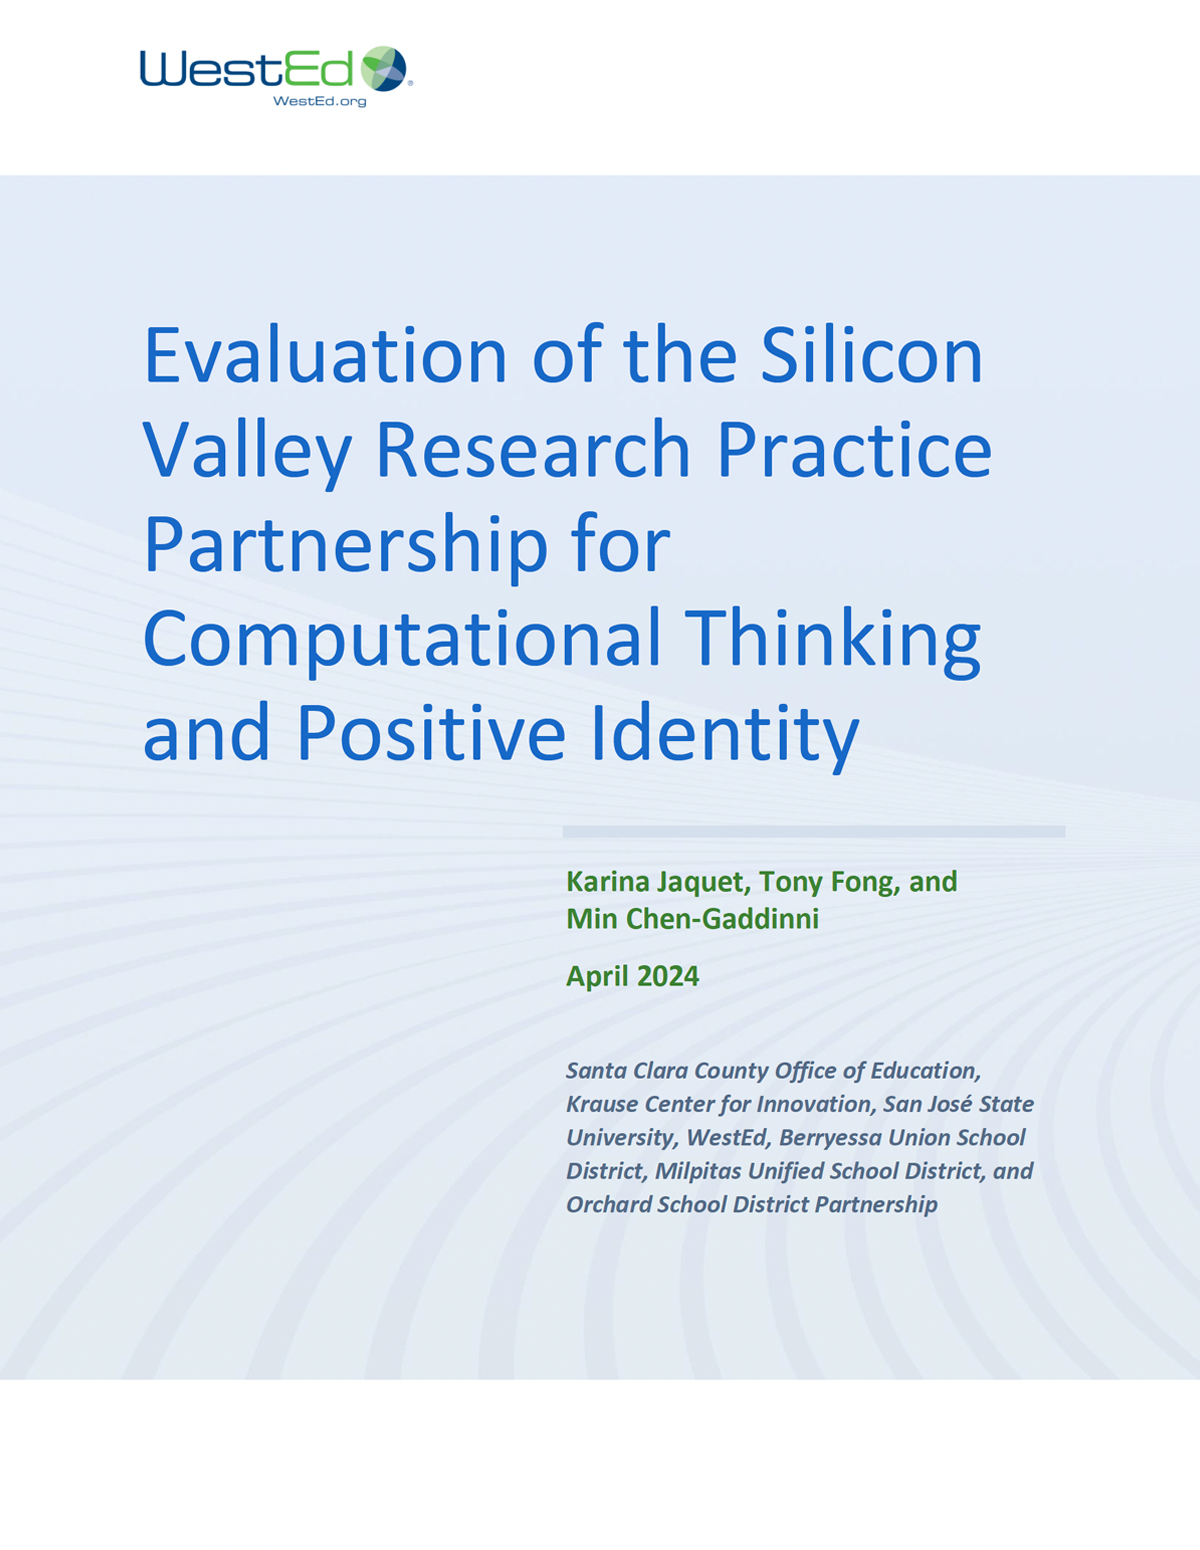 Cover image of Evaluation of the Silicon Valley Research Practice Partnership for Computational Thinking and Positive Identity